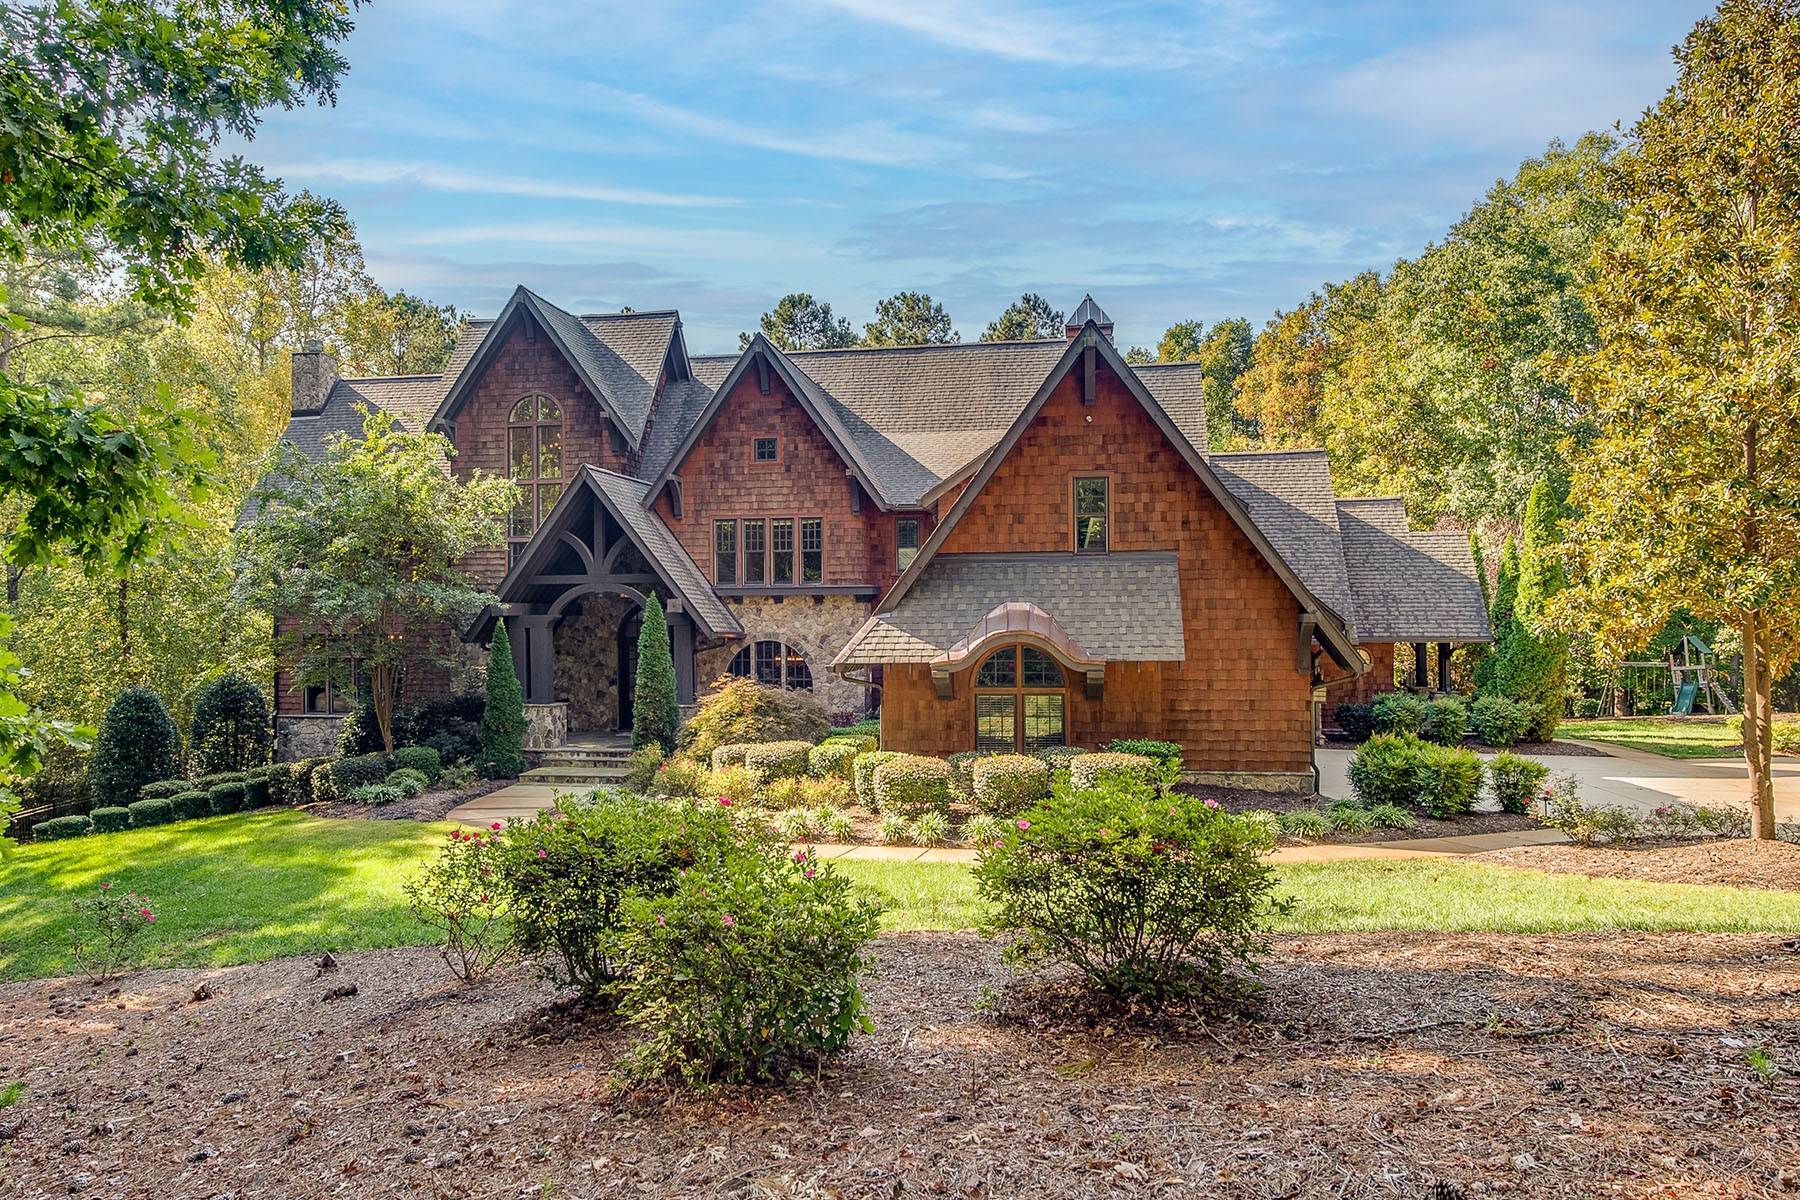 Single Family Homes for Active at THE SANCTUARY - CHARLOTTE 14140 Claysparrow Road Charlotte, North Carolina 28278 United States